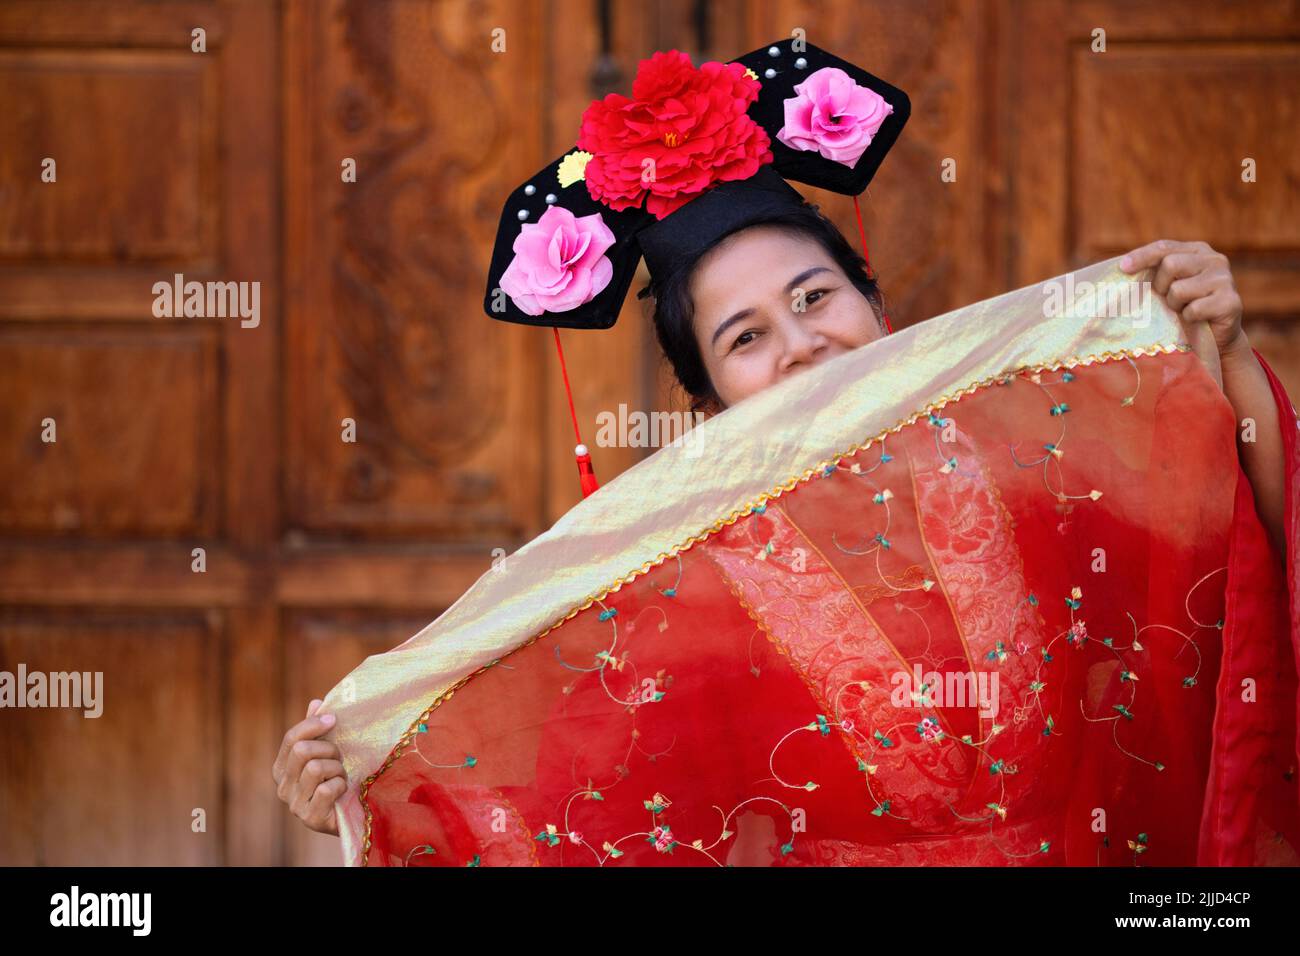 Joyful Chinese woman posing with traditional dress and hairstyle Stock Photo